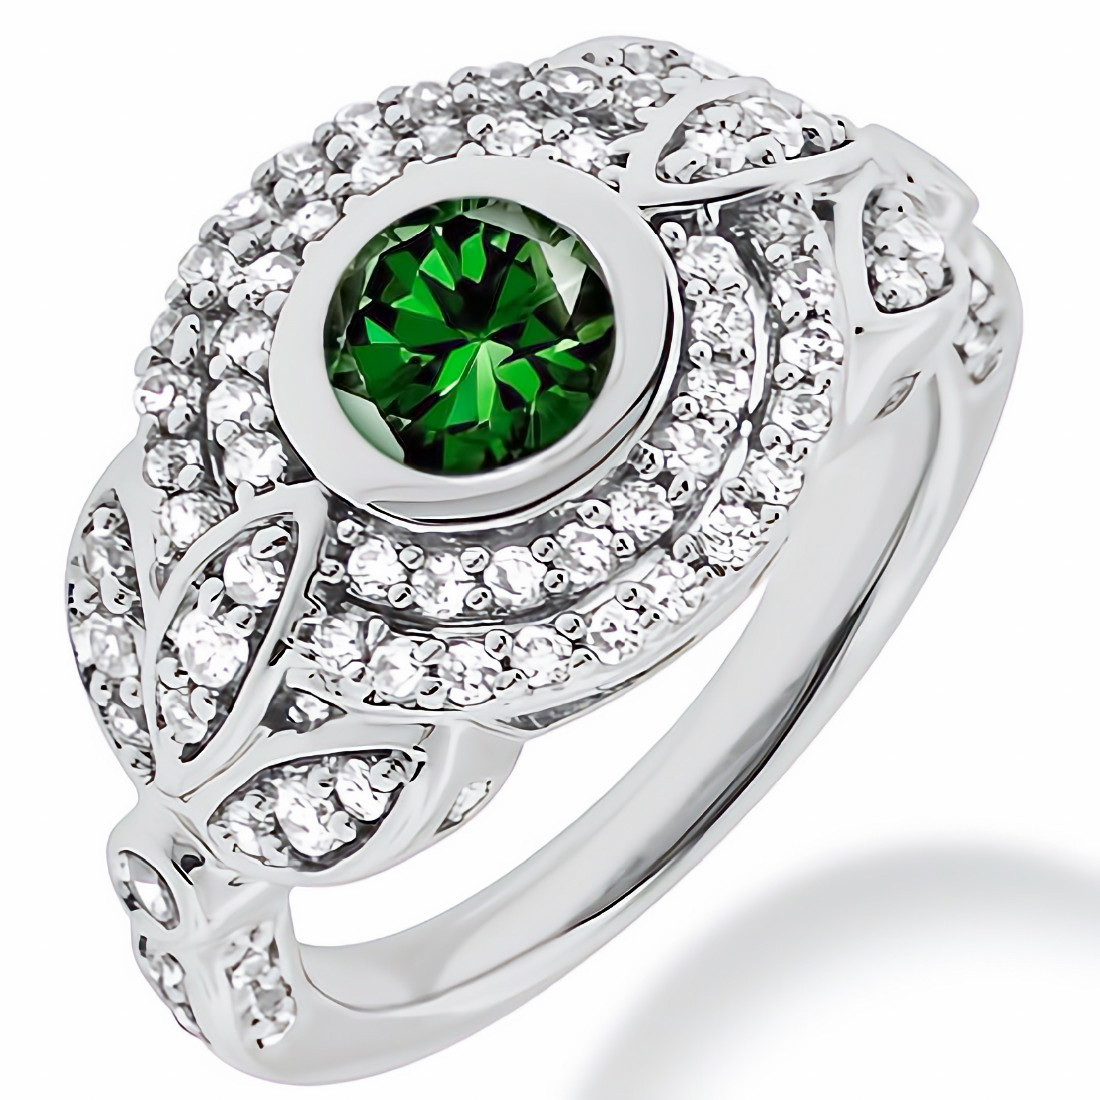 1.72ct VS1 Green Diamond Double Halo Cocktail Engagement Ring